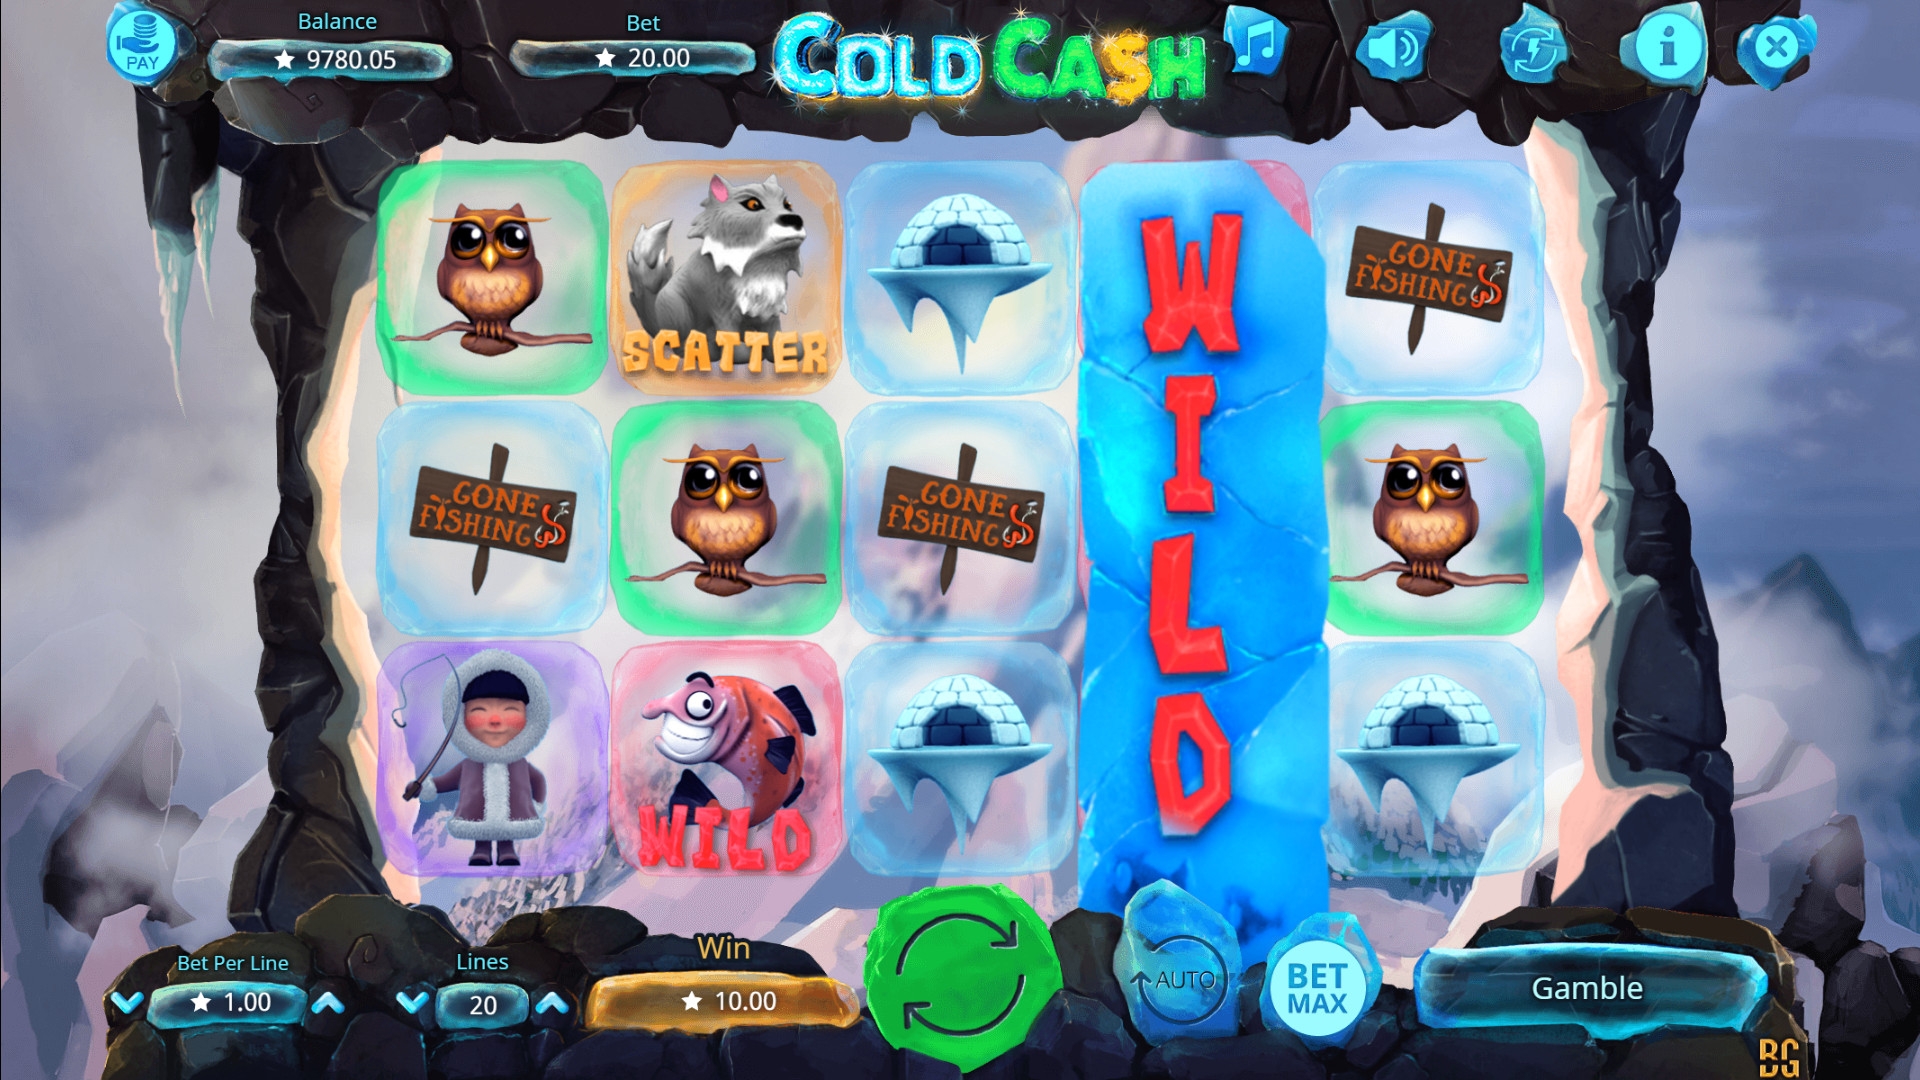 Cold Cash (Cold Cash) from category Slots